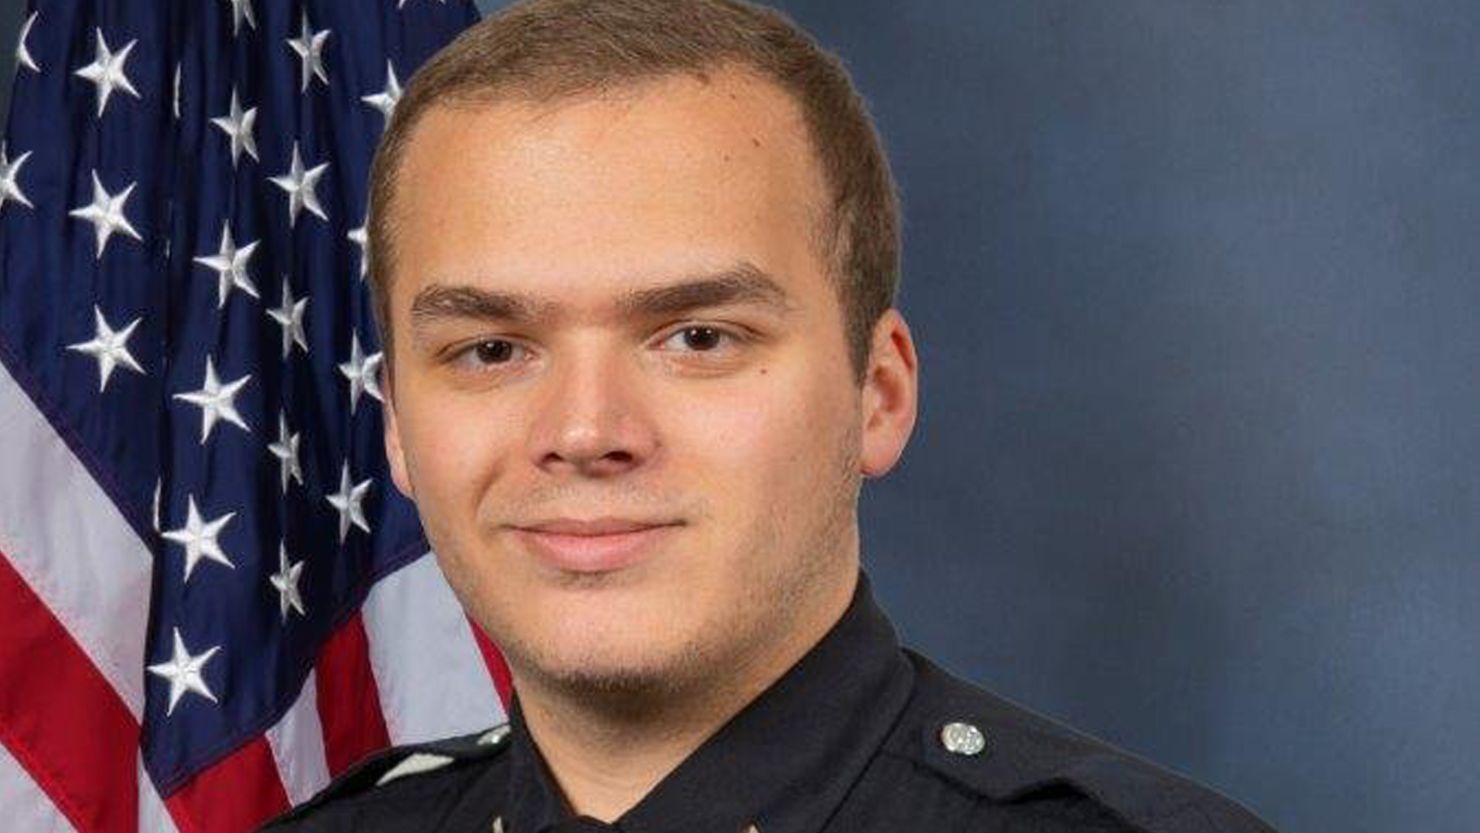 Louisville police Officer Nickolas Wilt, 26, was shot in the head in an April 10 bank attack that left five people dead and others injured, police said.